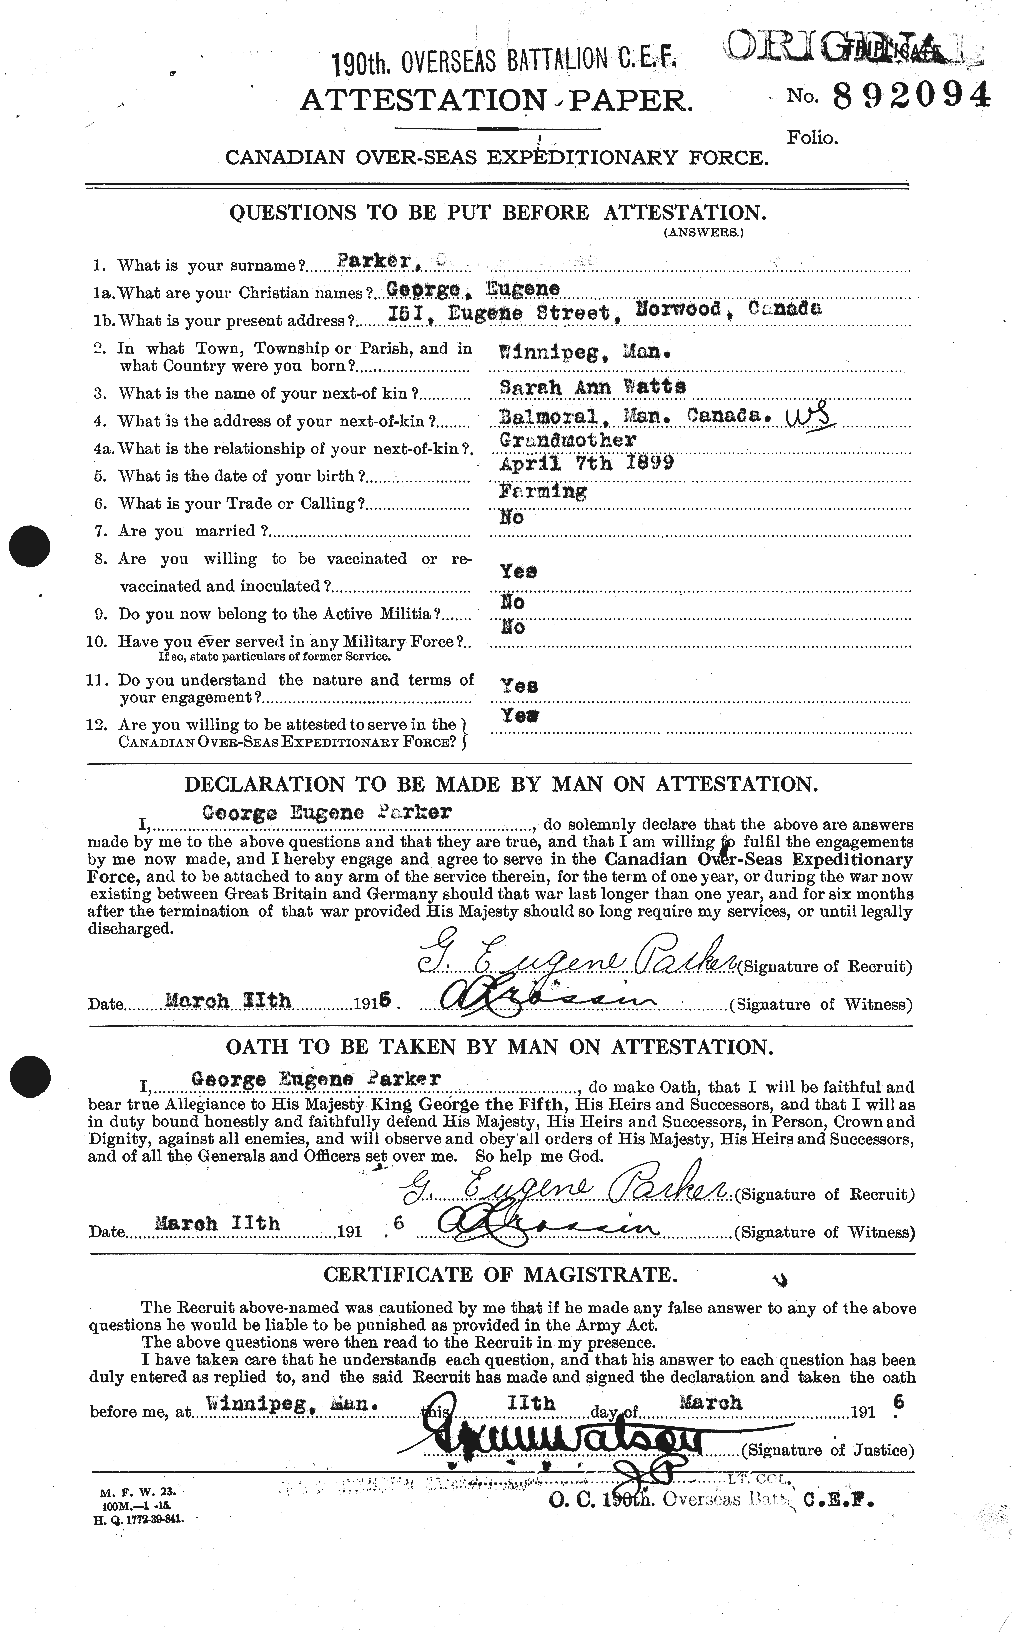 Personnel Records of the First World War - CEF 565258a